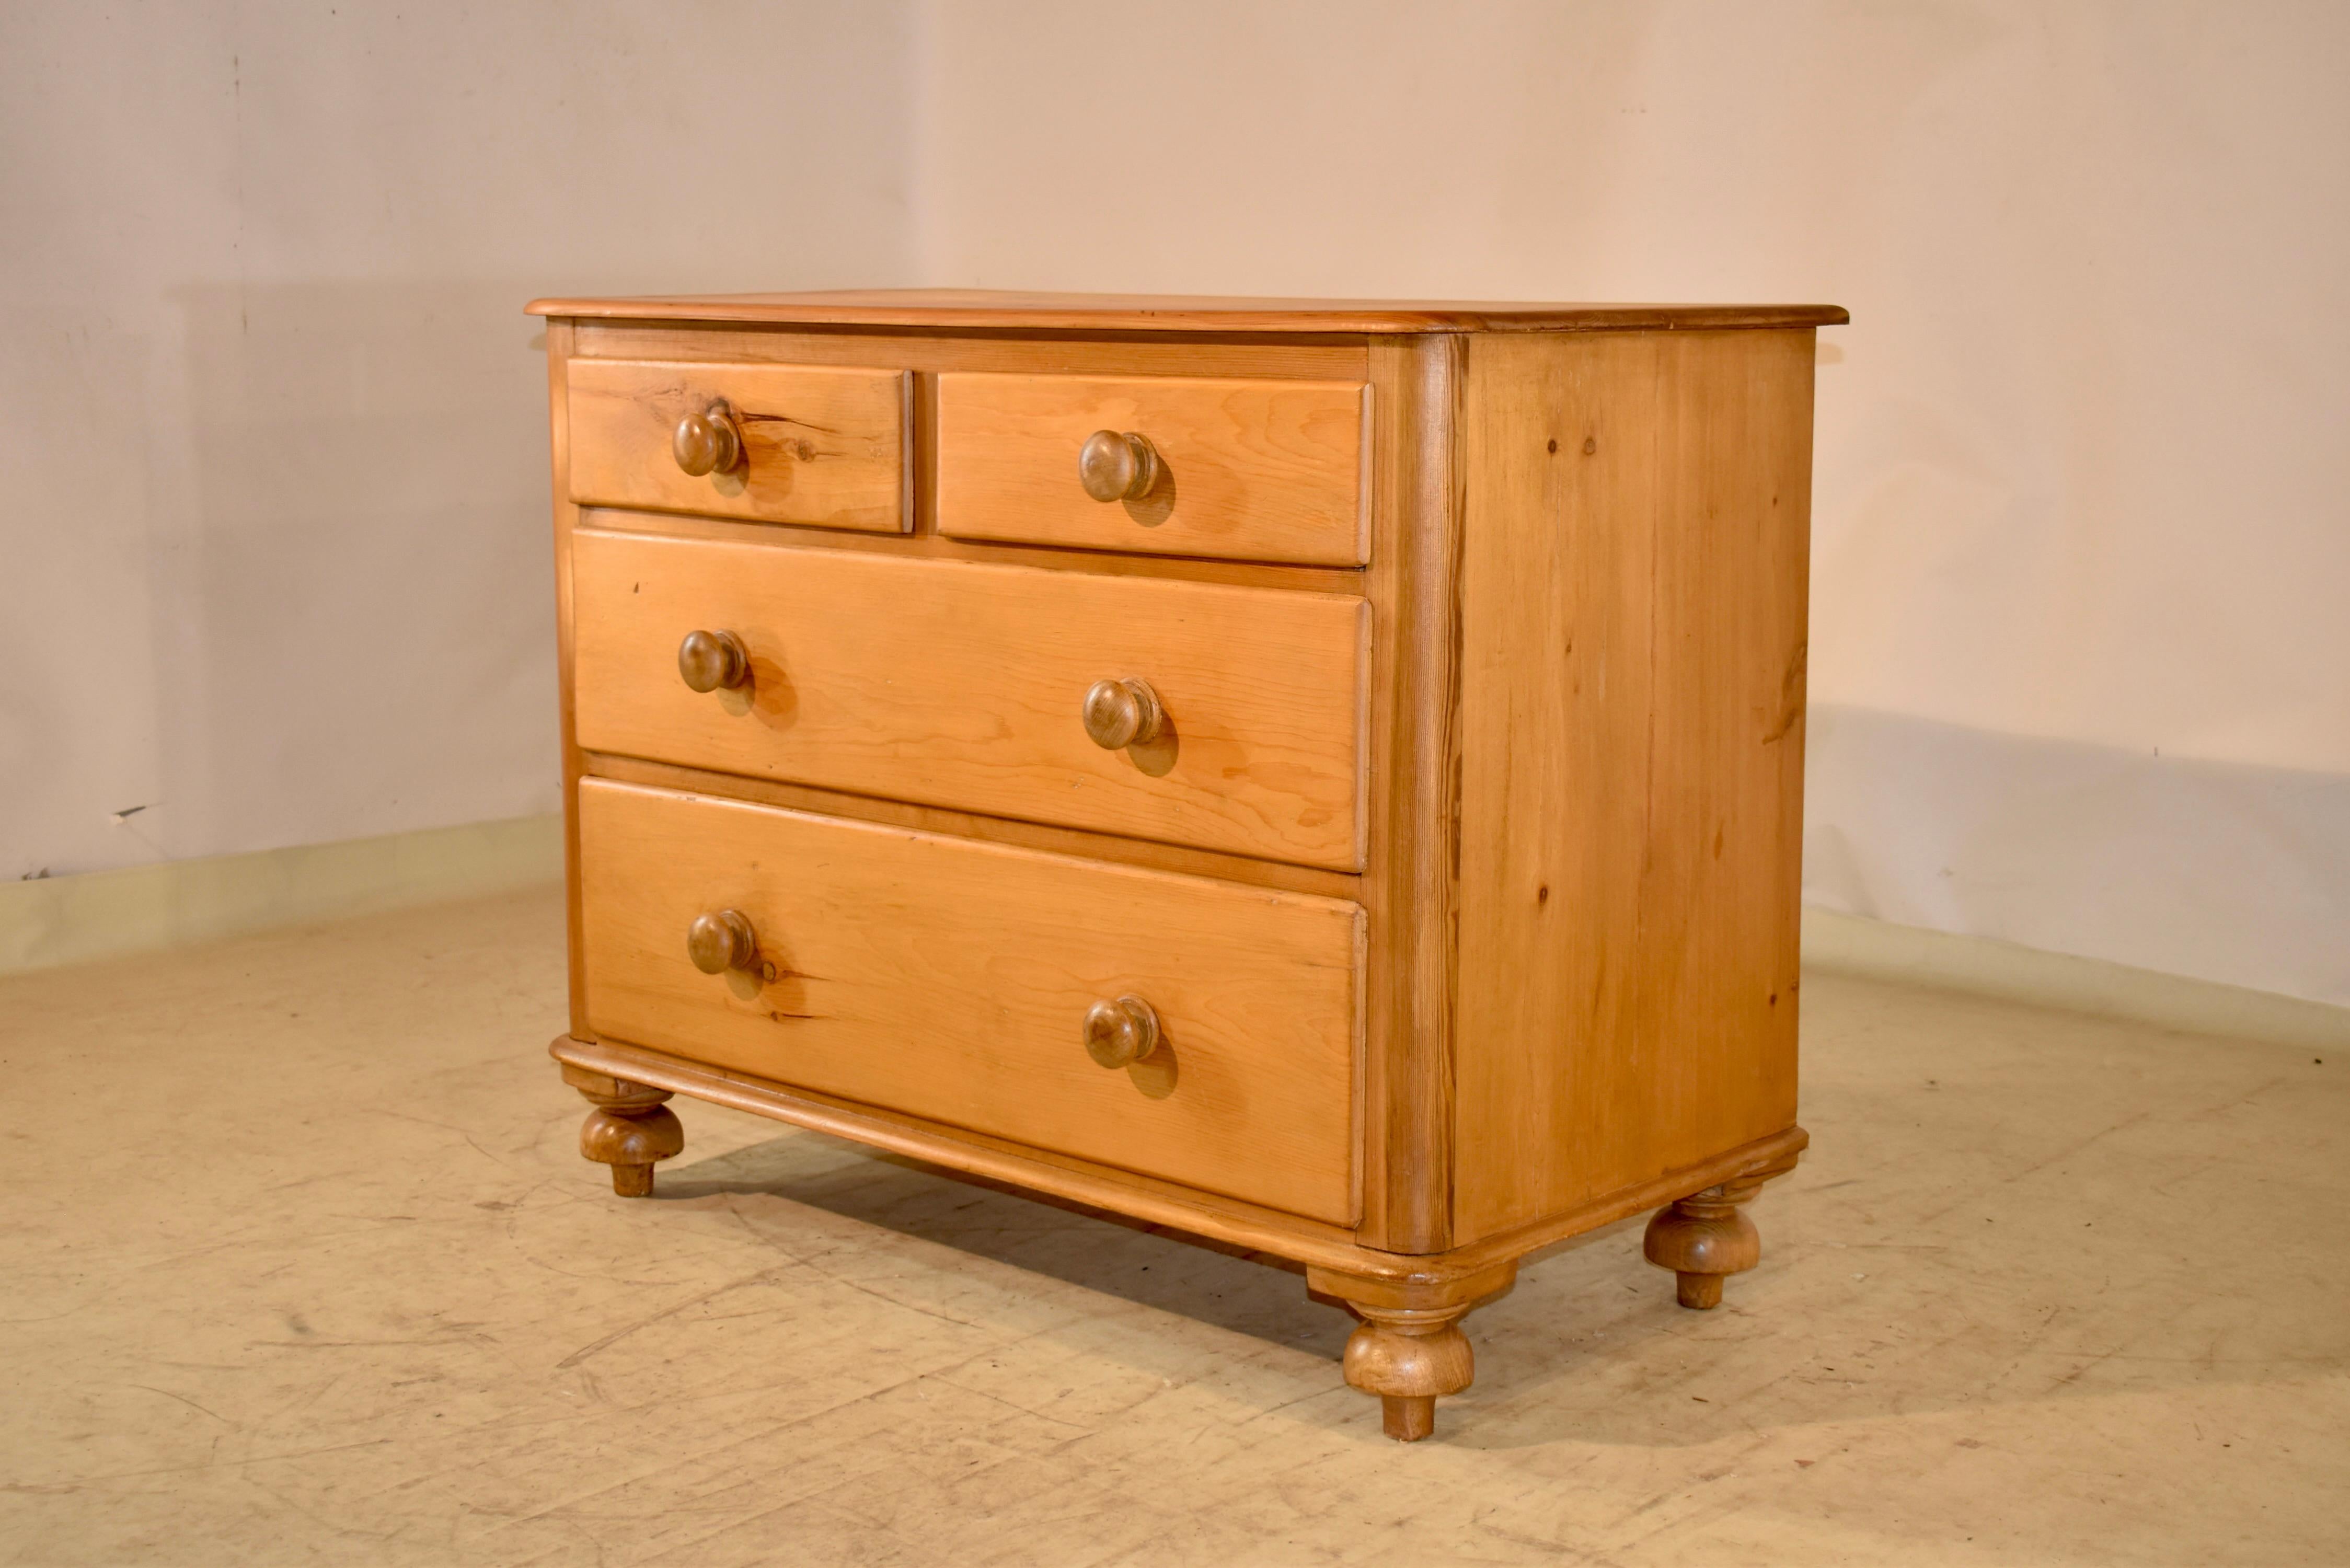 19th Century English Pine Chest of Drawers In Good Condition For Sale In High Point, NC